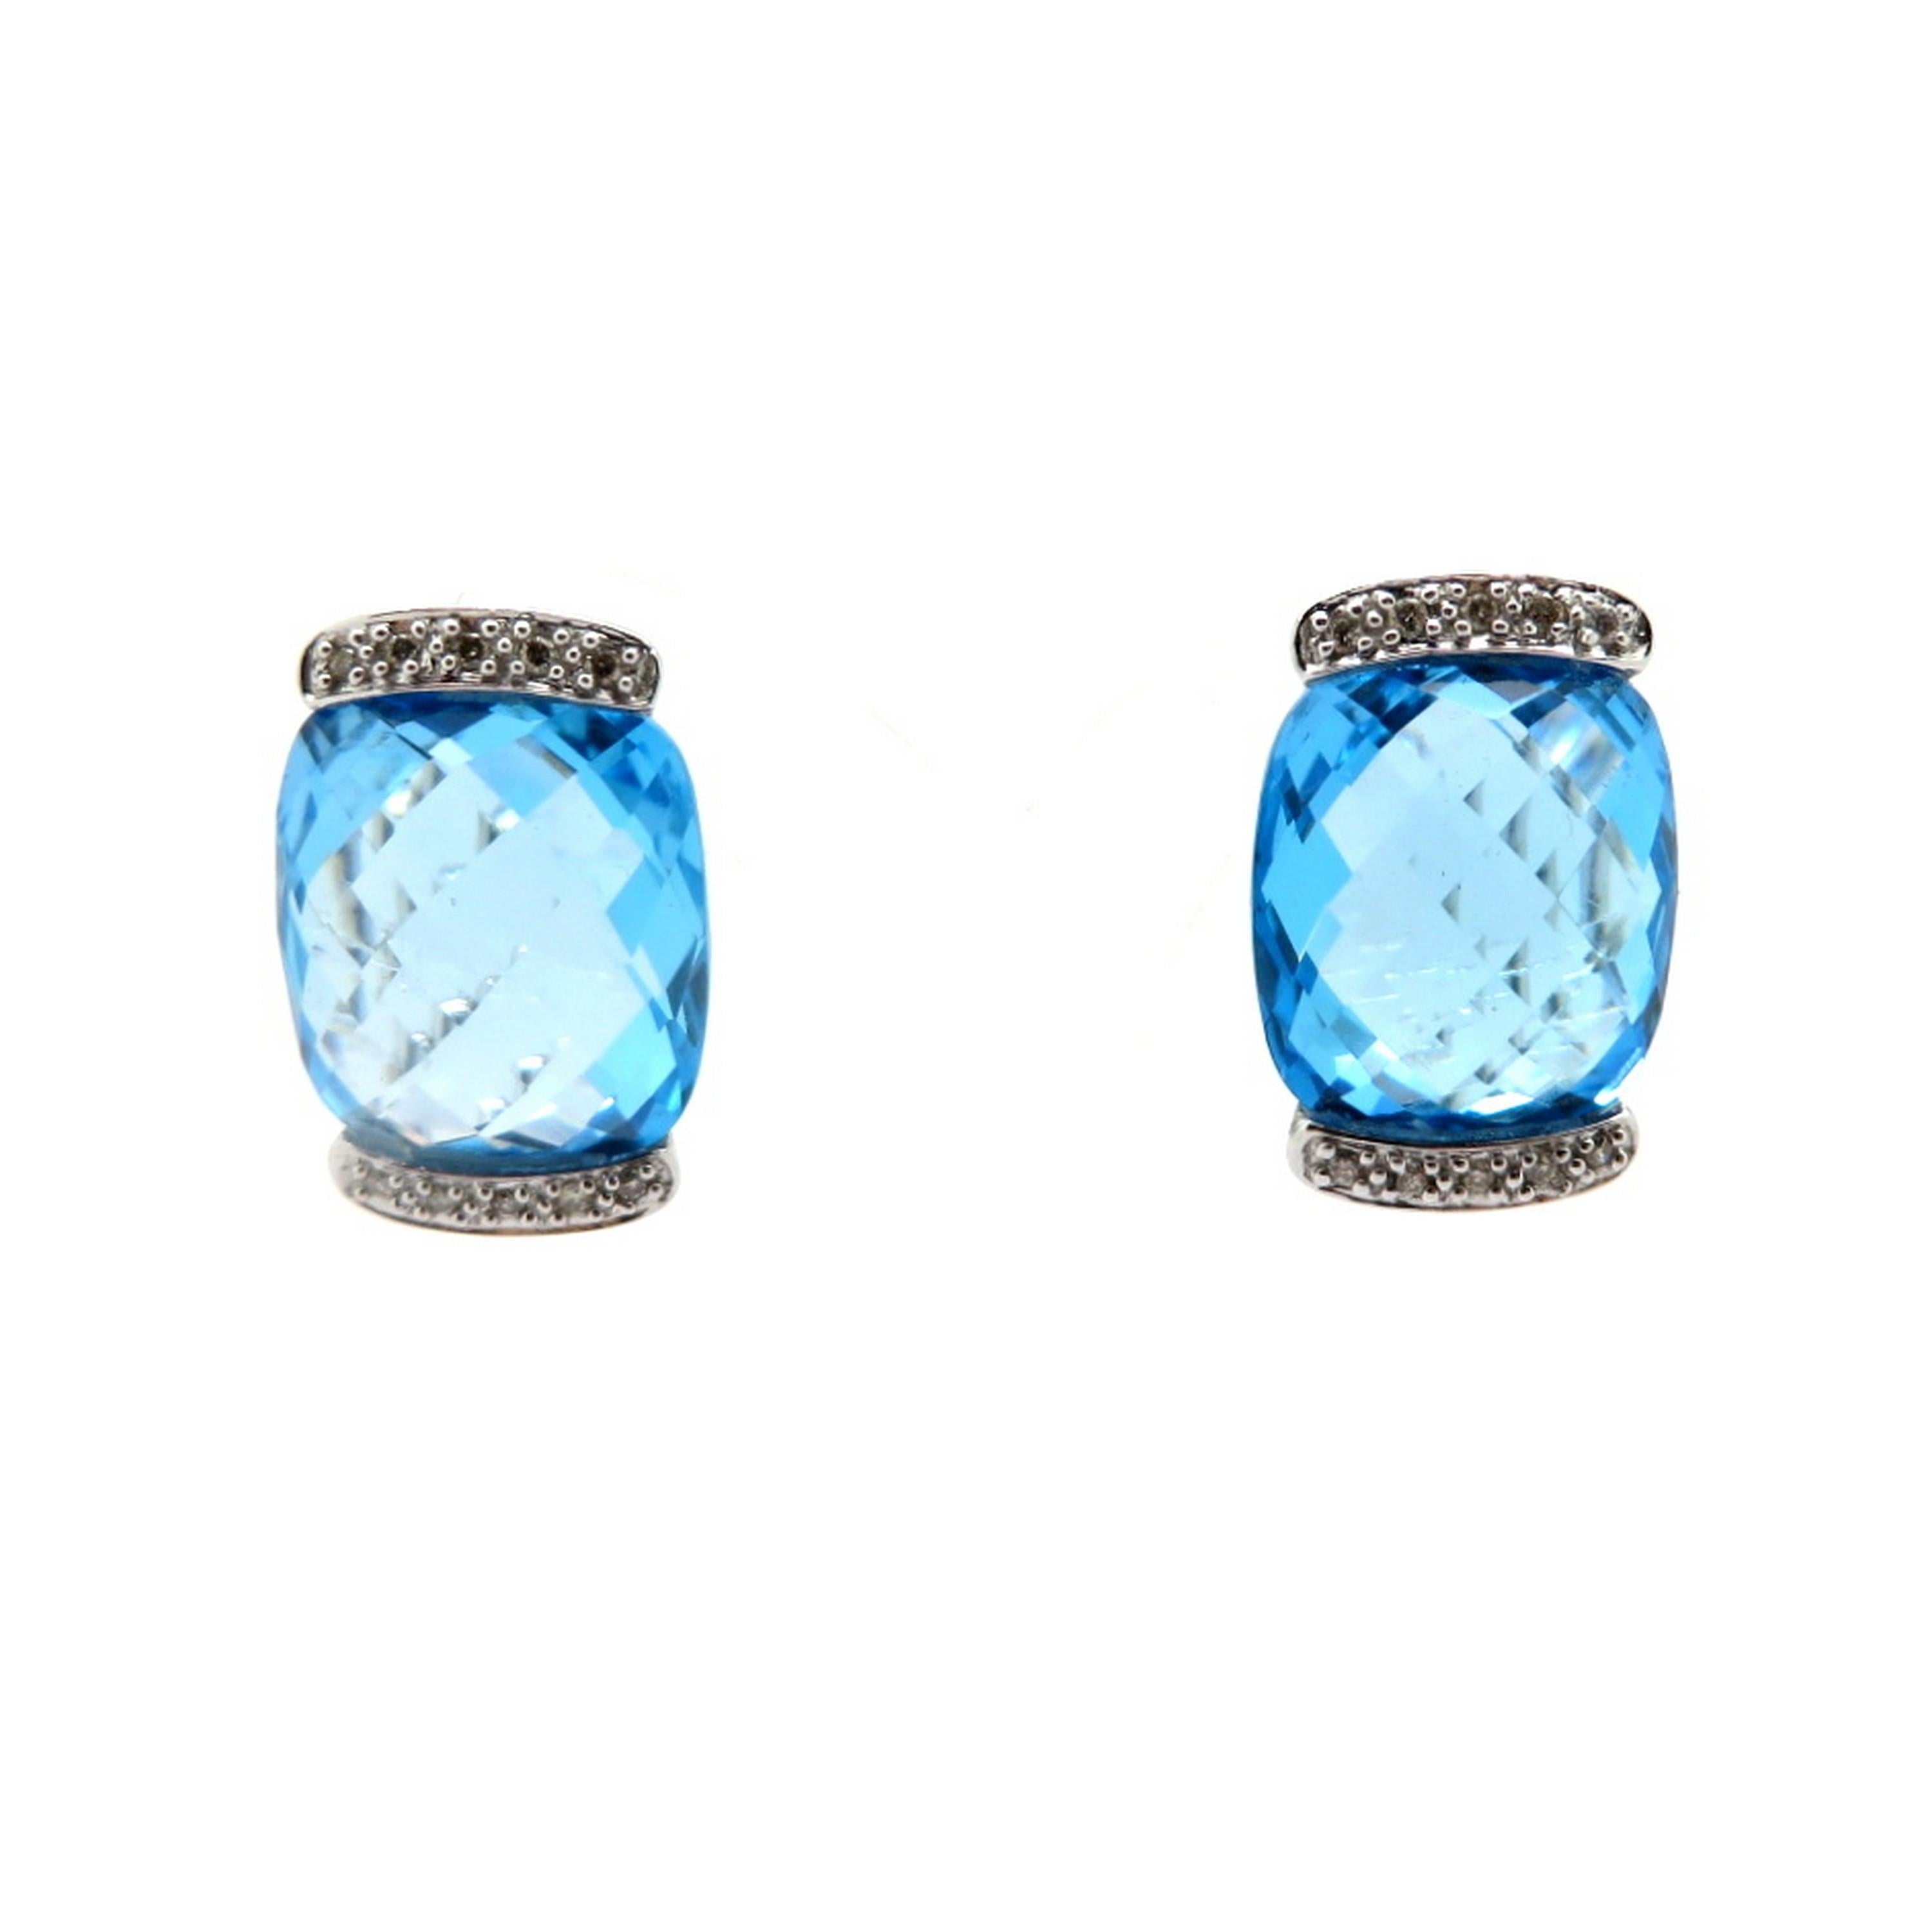 Estate 14K white gold large blue topaz and diamond fashion statement earrings. Showcasing two fine quality Swiss blue checkerboard faceted cushion cut blue topaz gemstones. Accented with 20 round brilliant cut bead set diamonds weighing a combined